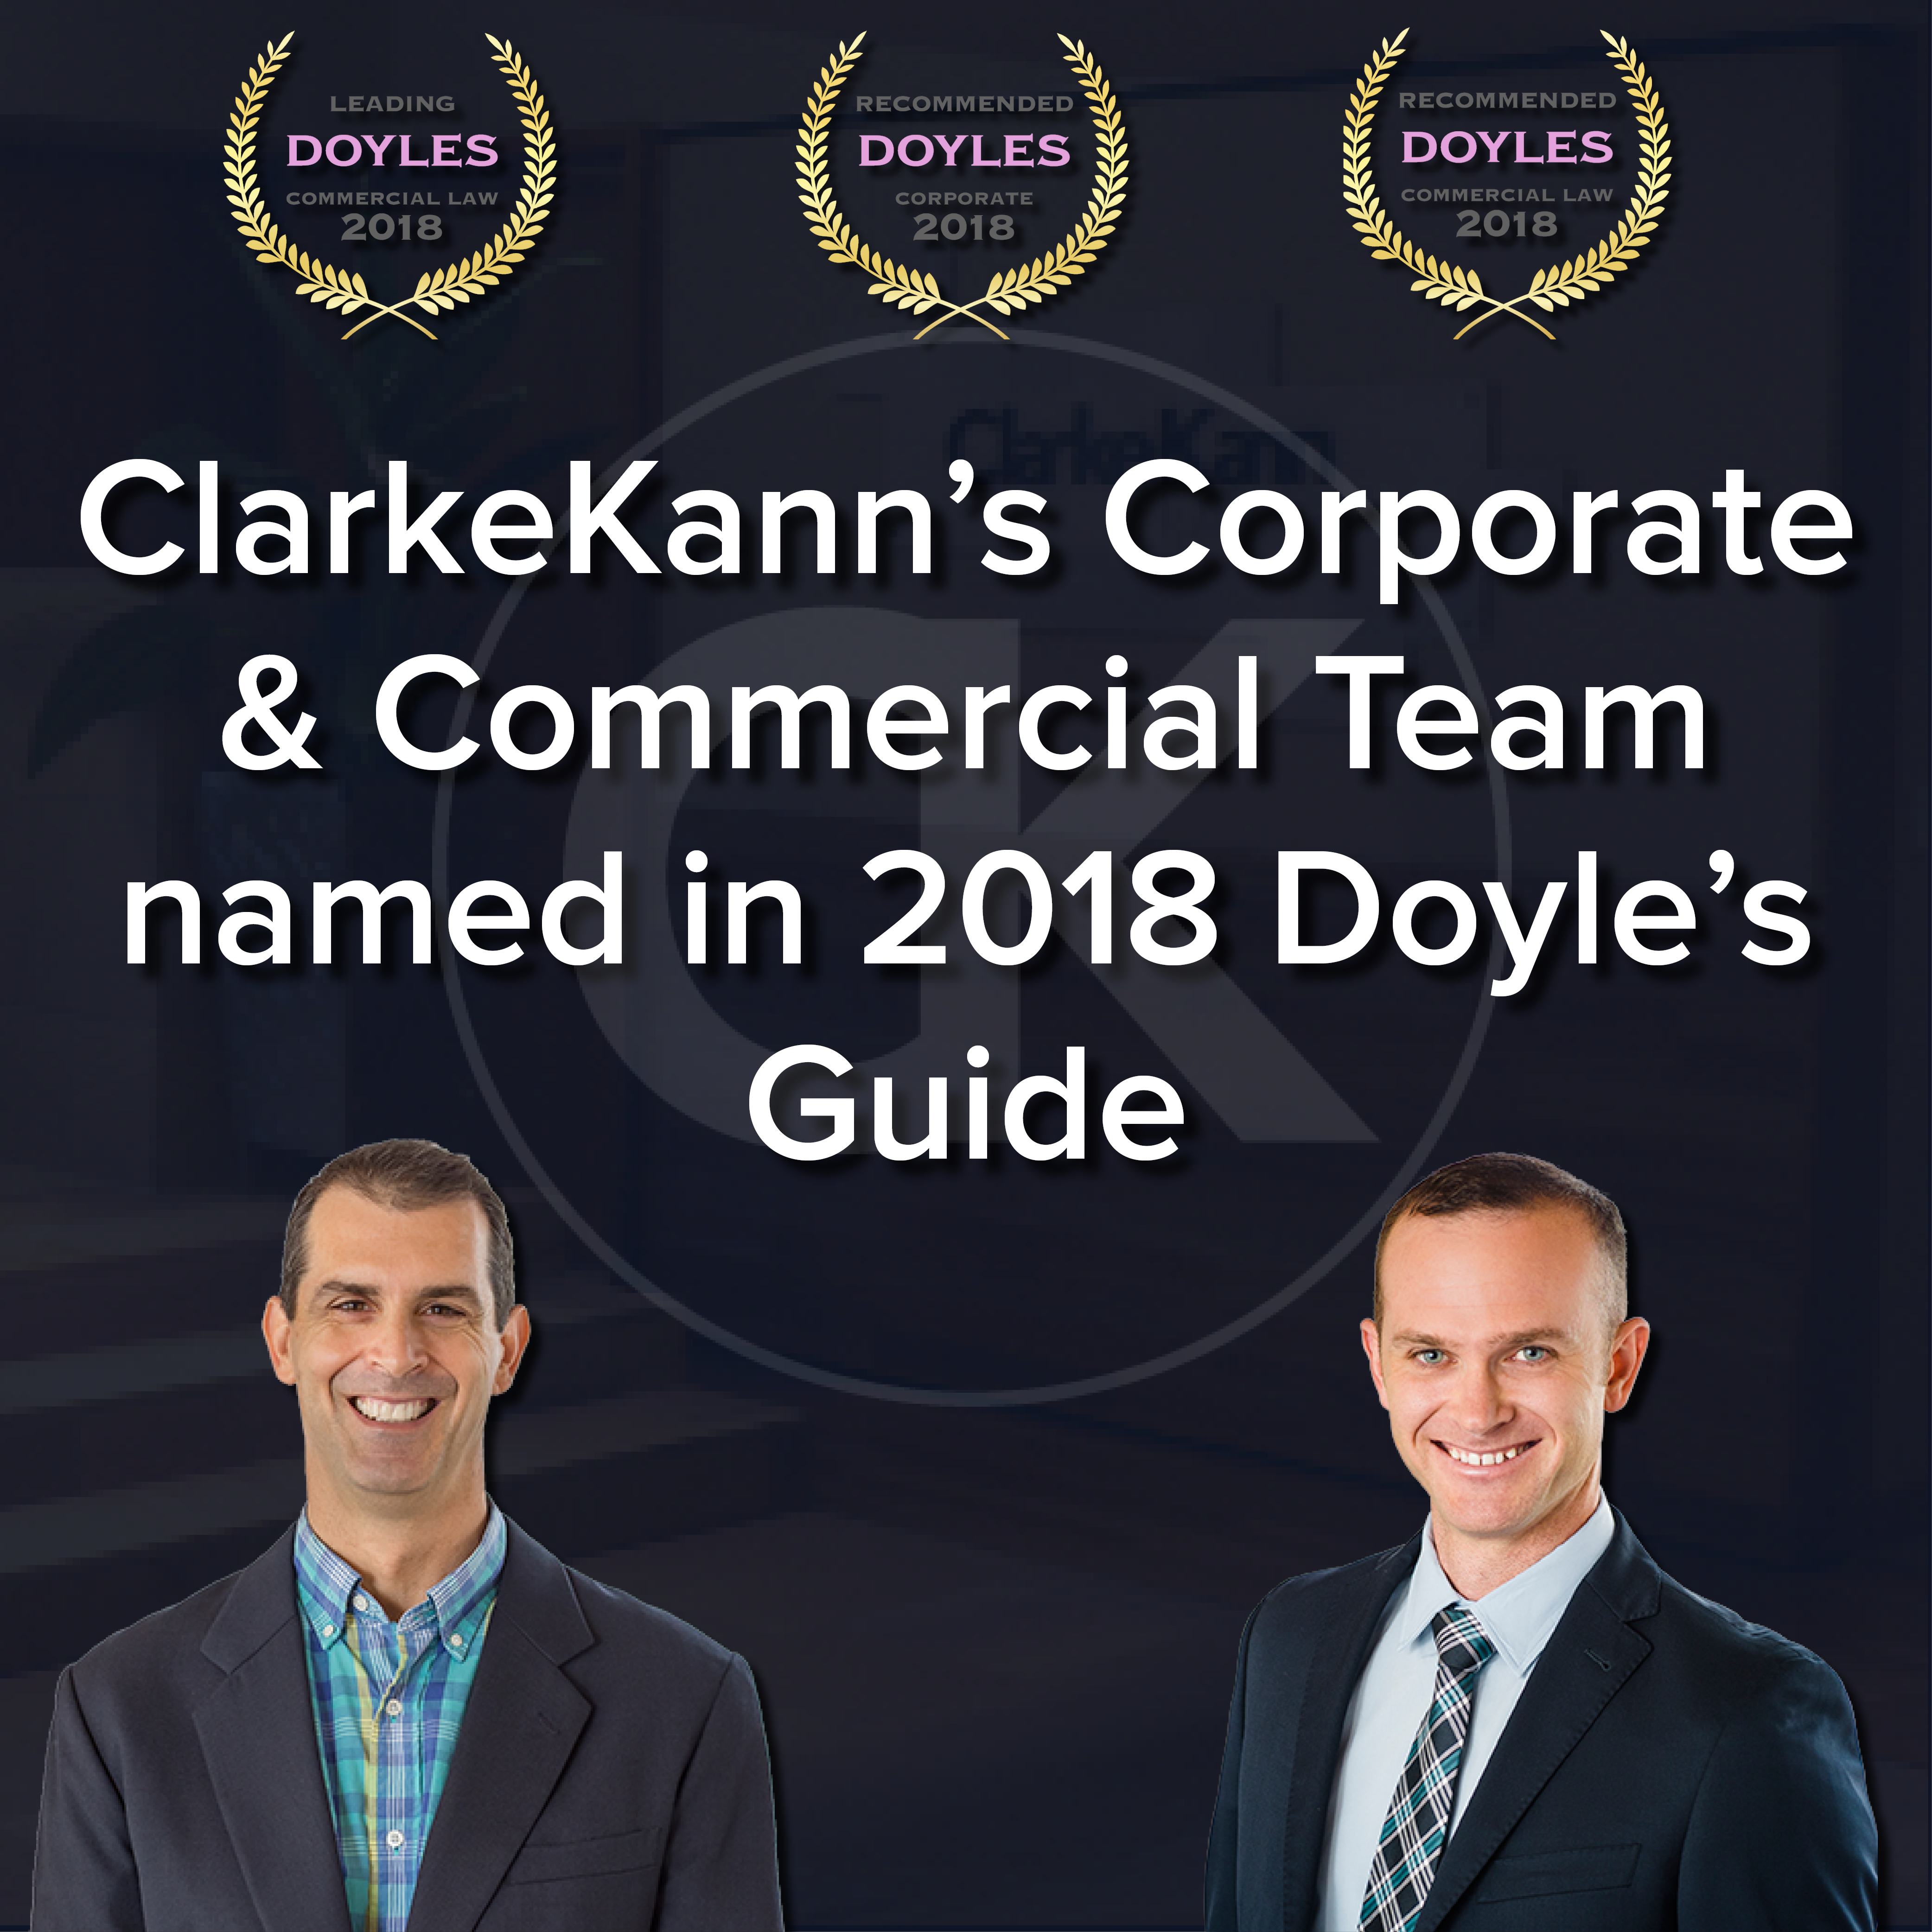 ANNOUNCEMENT: ClarkeKann’s Corporate & Commercial Team Named in the 2018 Doyle’s Guide